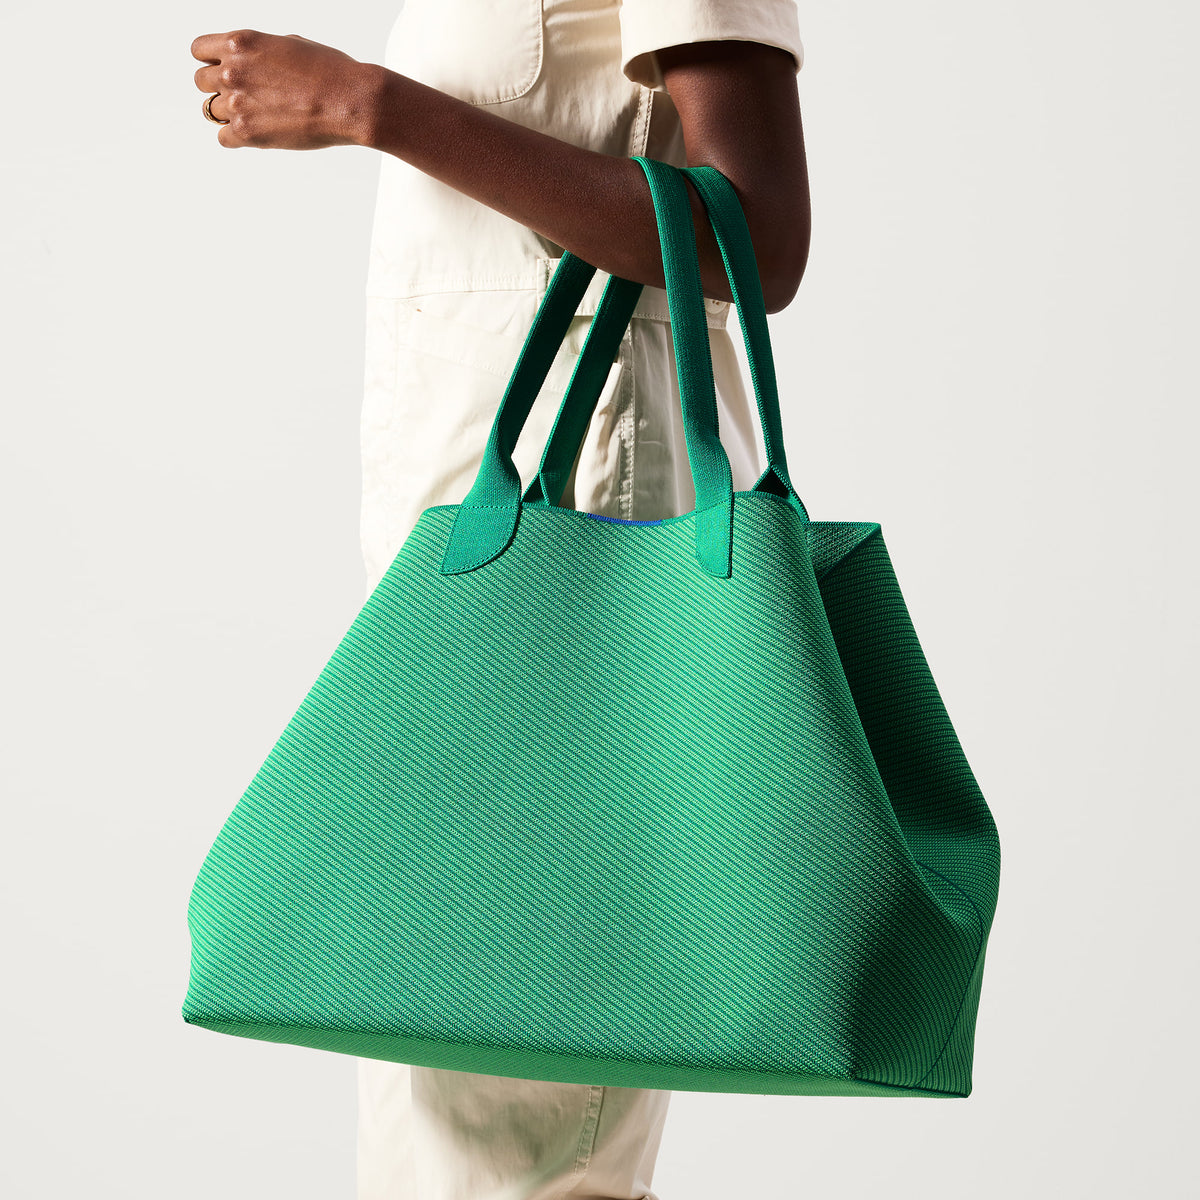 The Lightweight Mega Tote in Courtside White